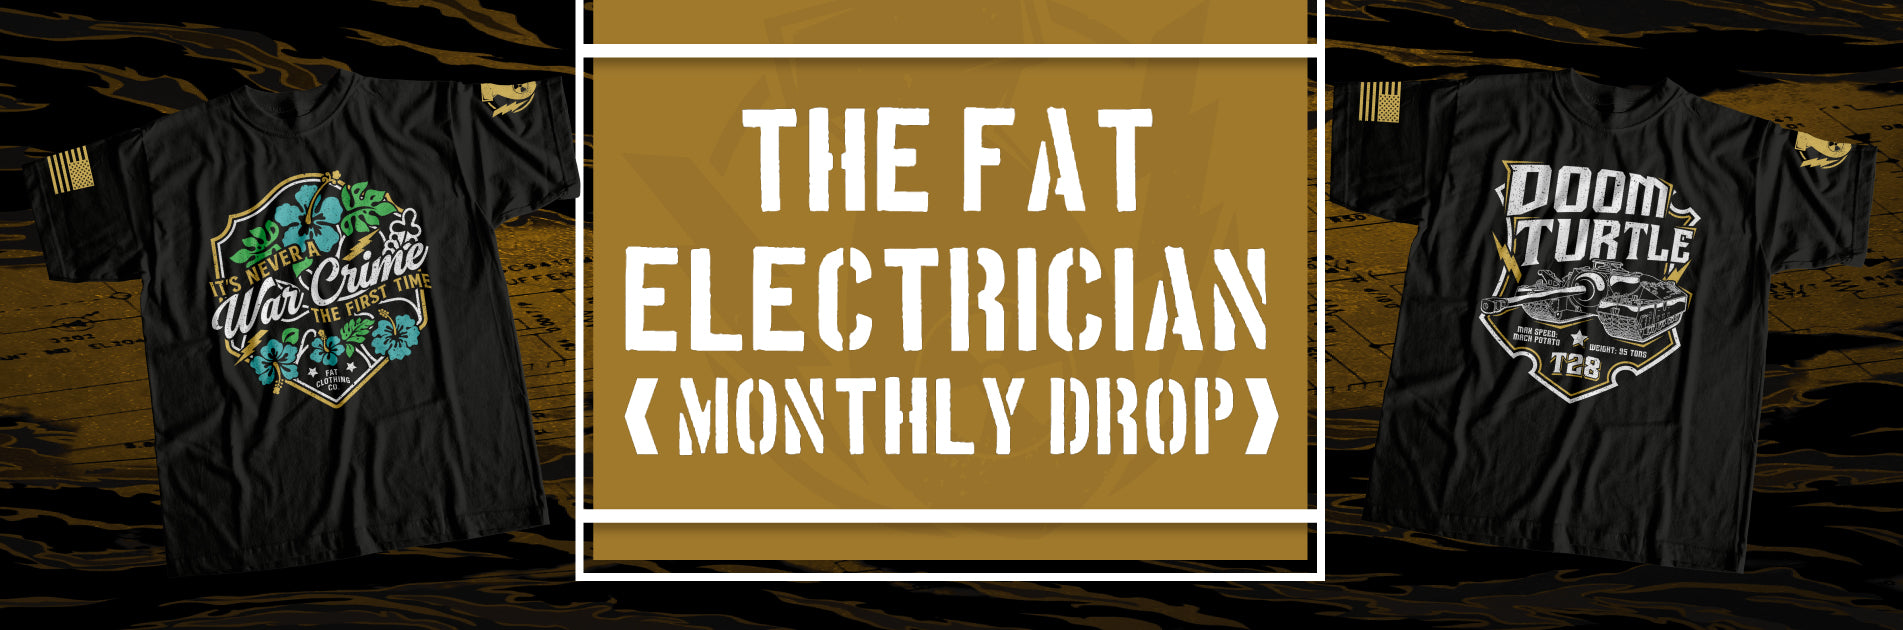 /collections/the-fat-electrician-monthly-drop-limited-releases